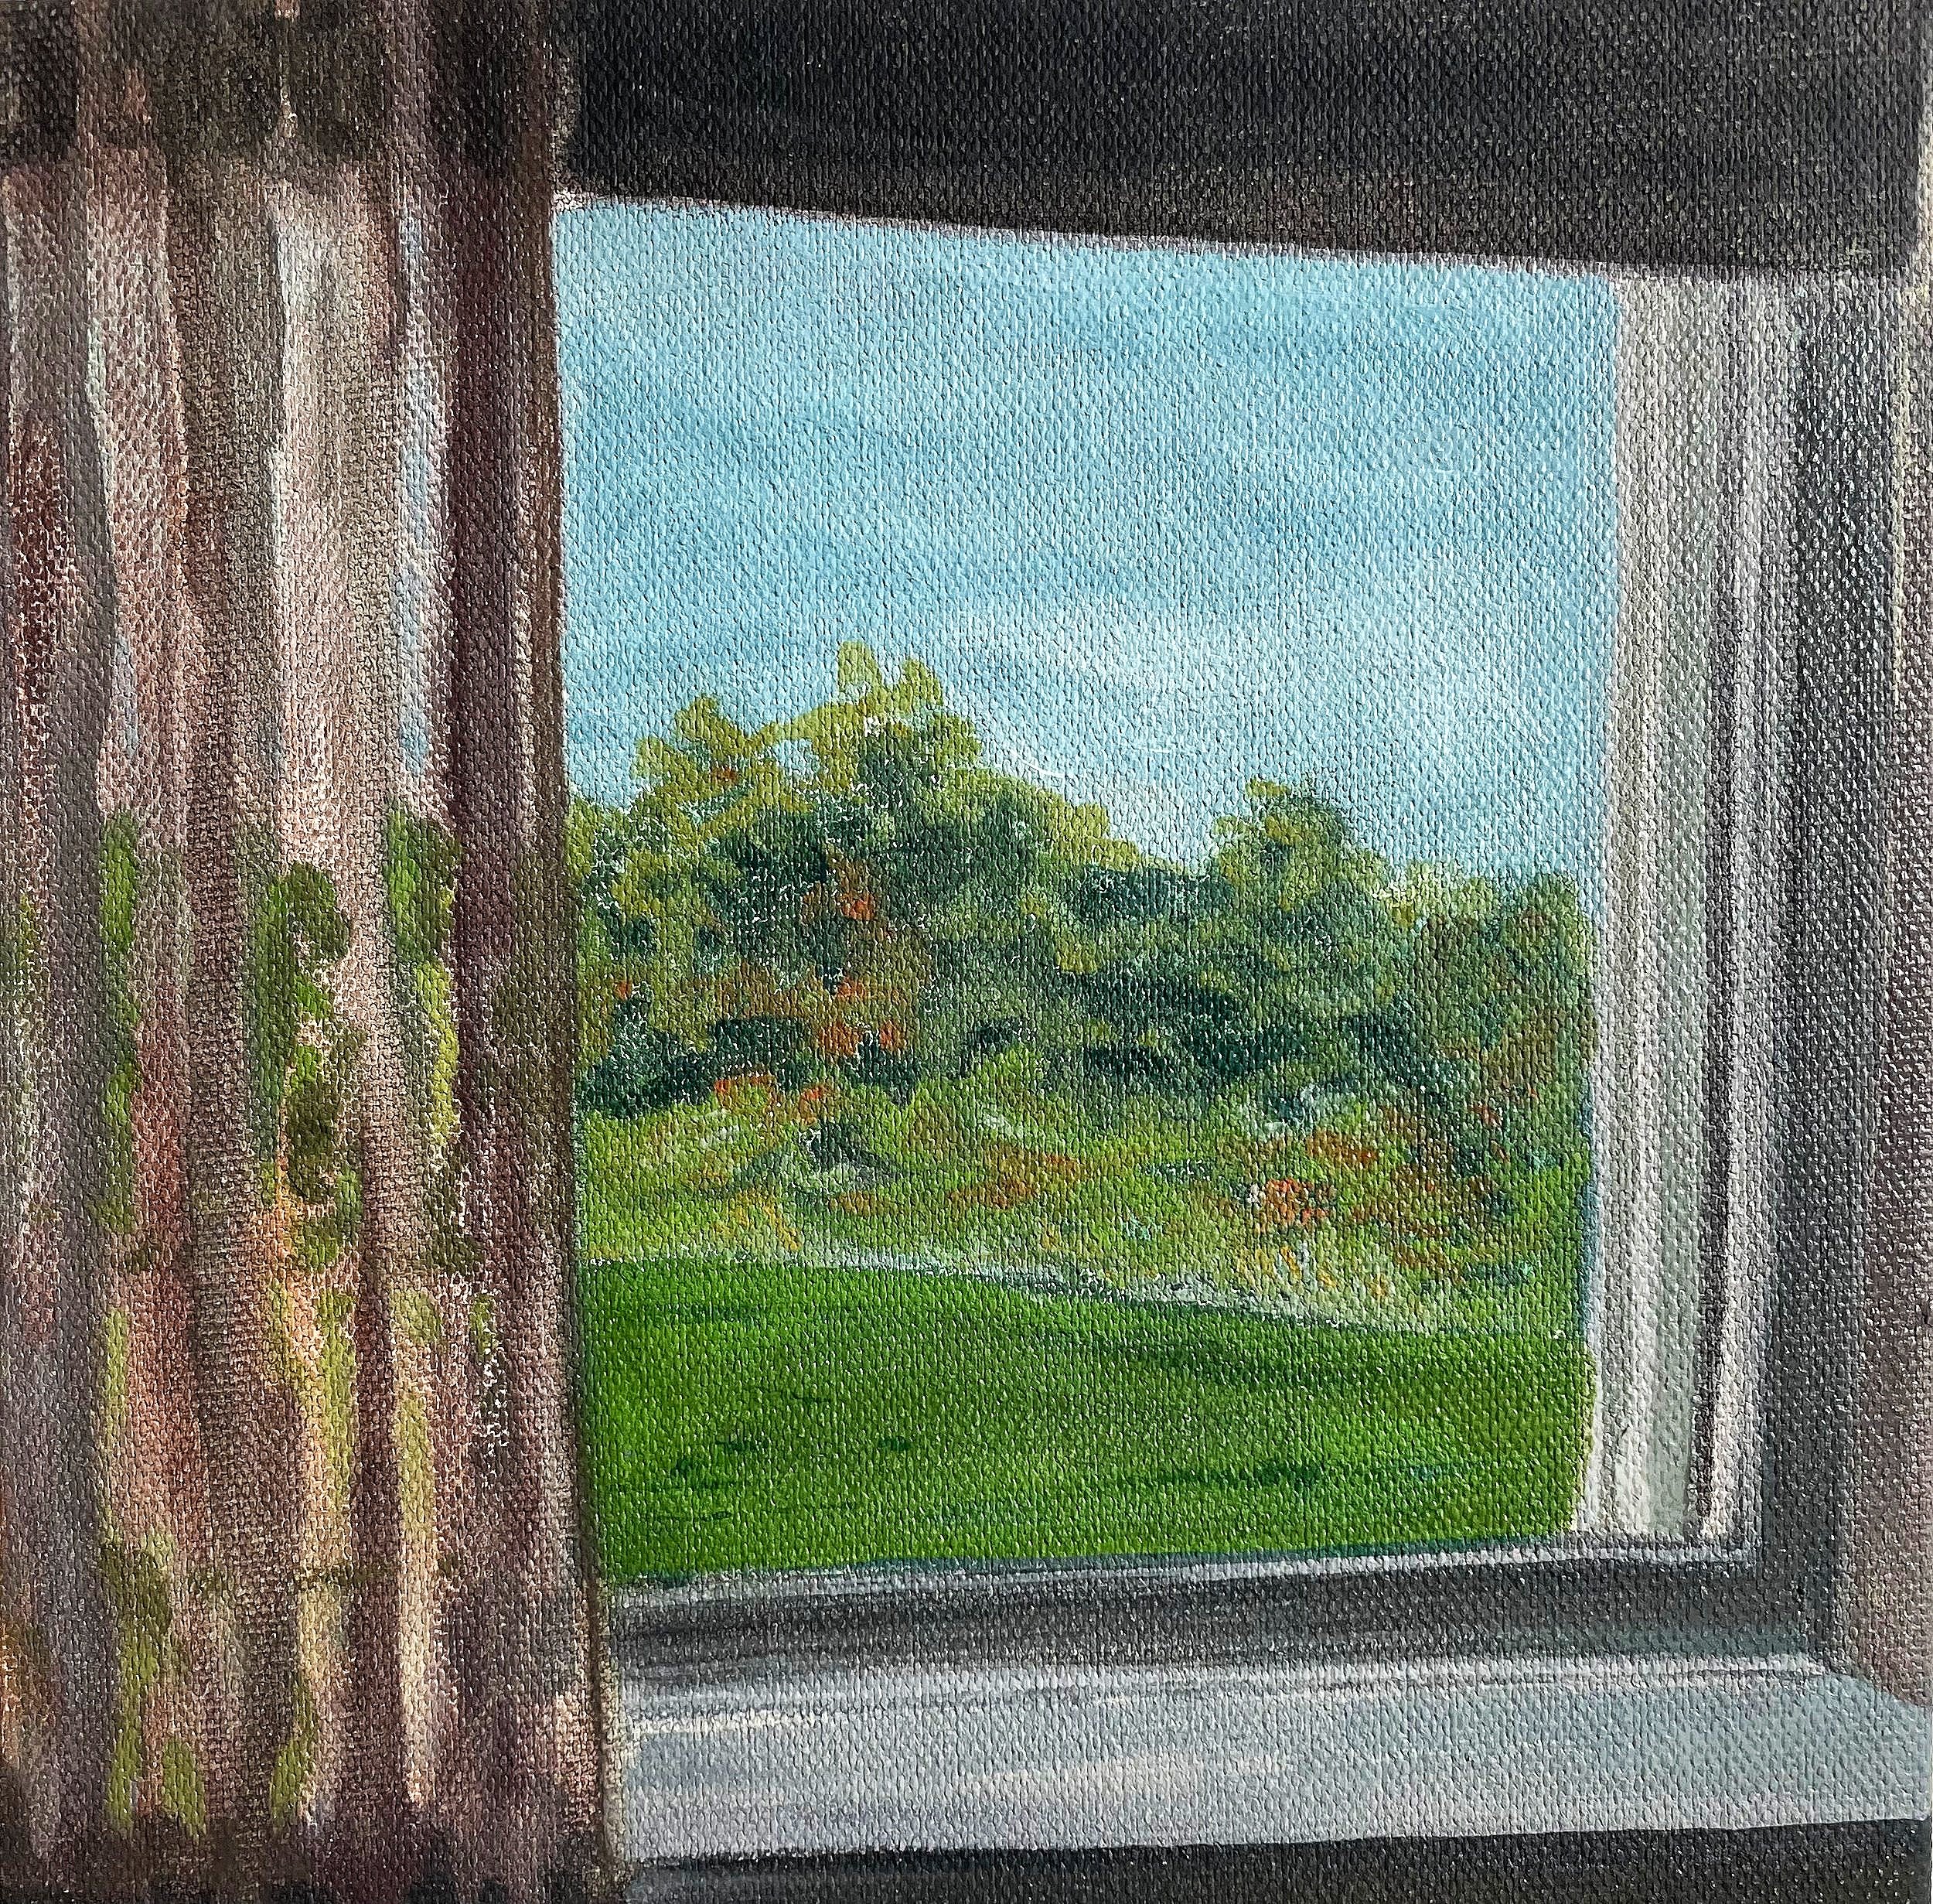   Guest Room Window,  Oil on Canvas, 8” x 8”, 2022 